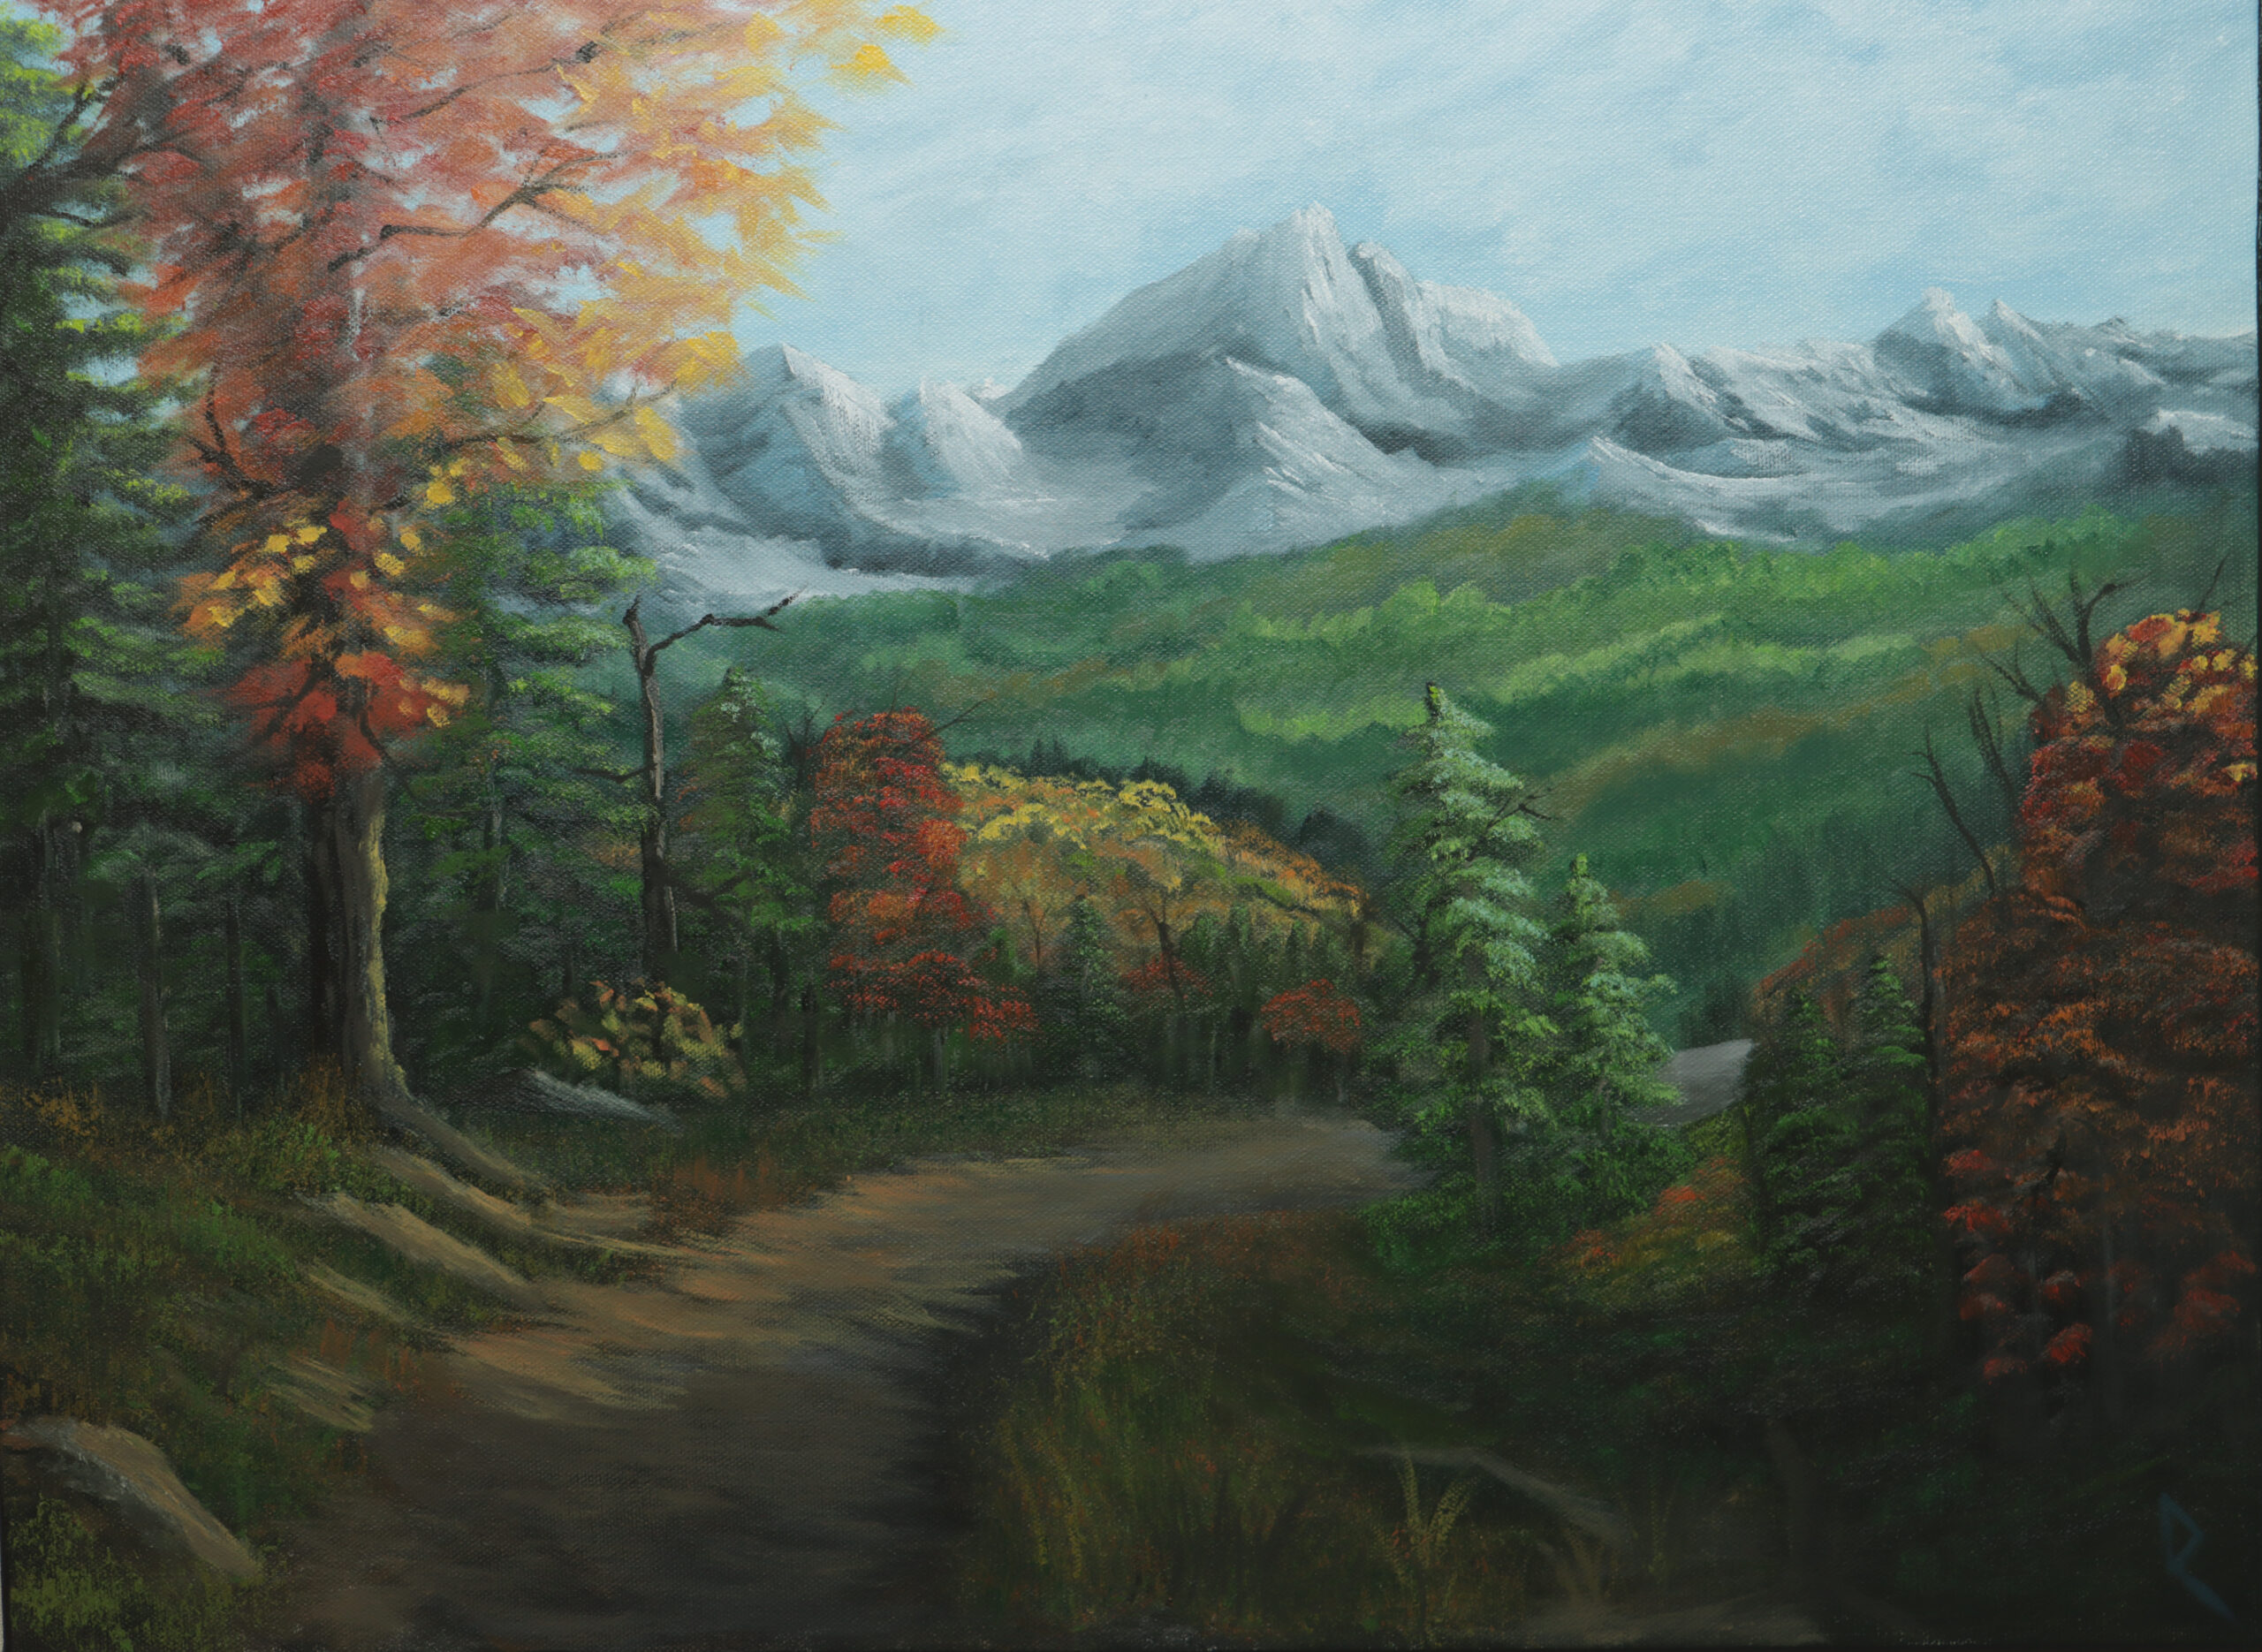 Oil painting of a mountain valley in autumn on 18"x24" canvas. A mountain range in the distance overlooks a dense, forested valley. A path of trees, rocks and grass leads toward the valley. Sunlight creates dynamic highlights amongst the mountains, forests and leaves.